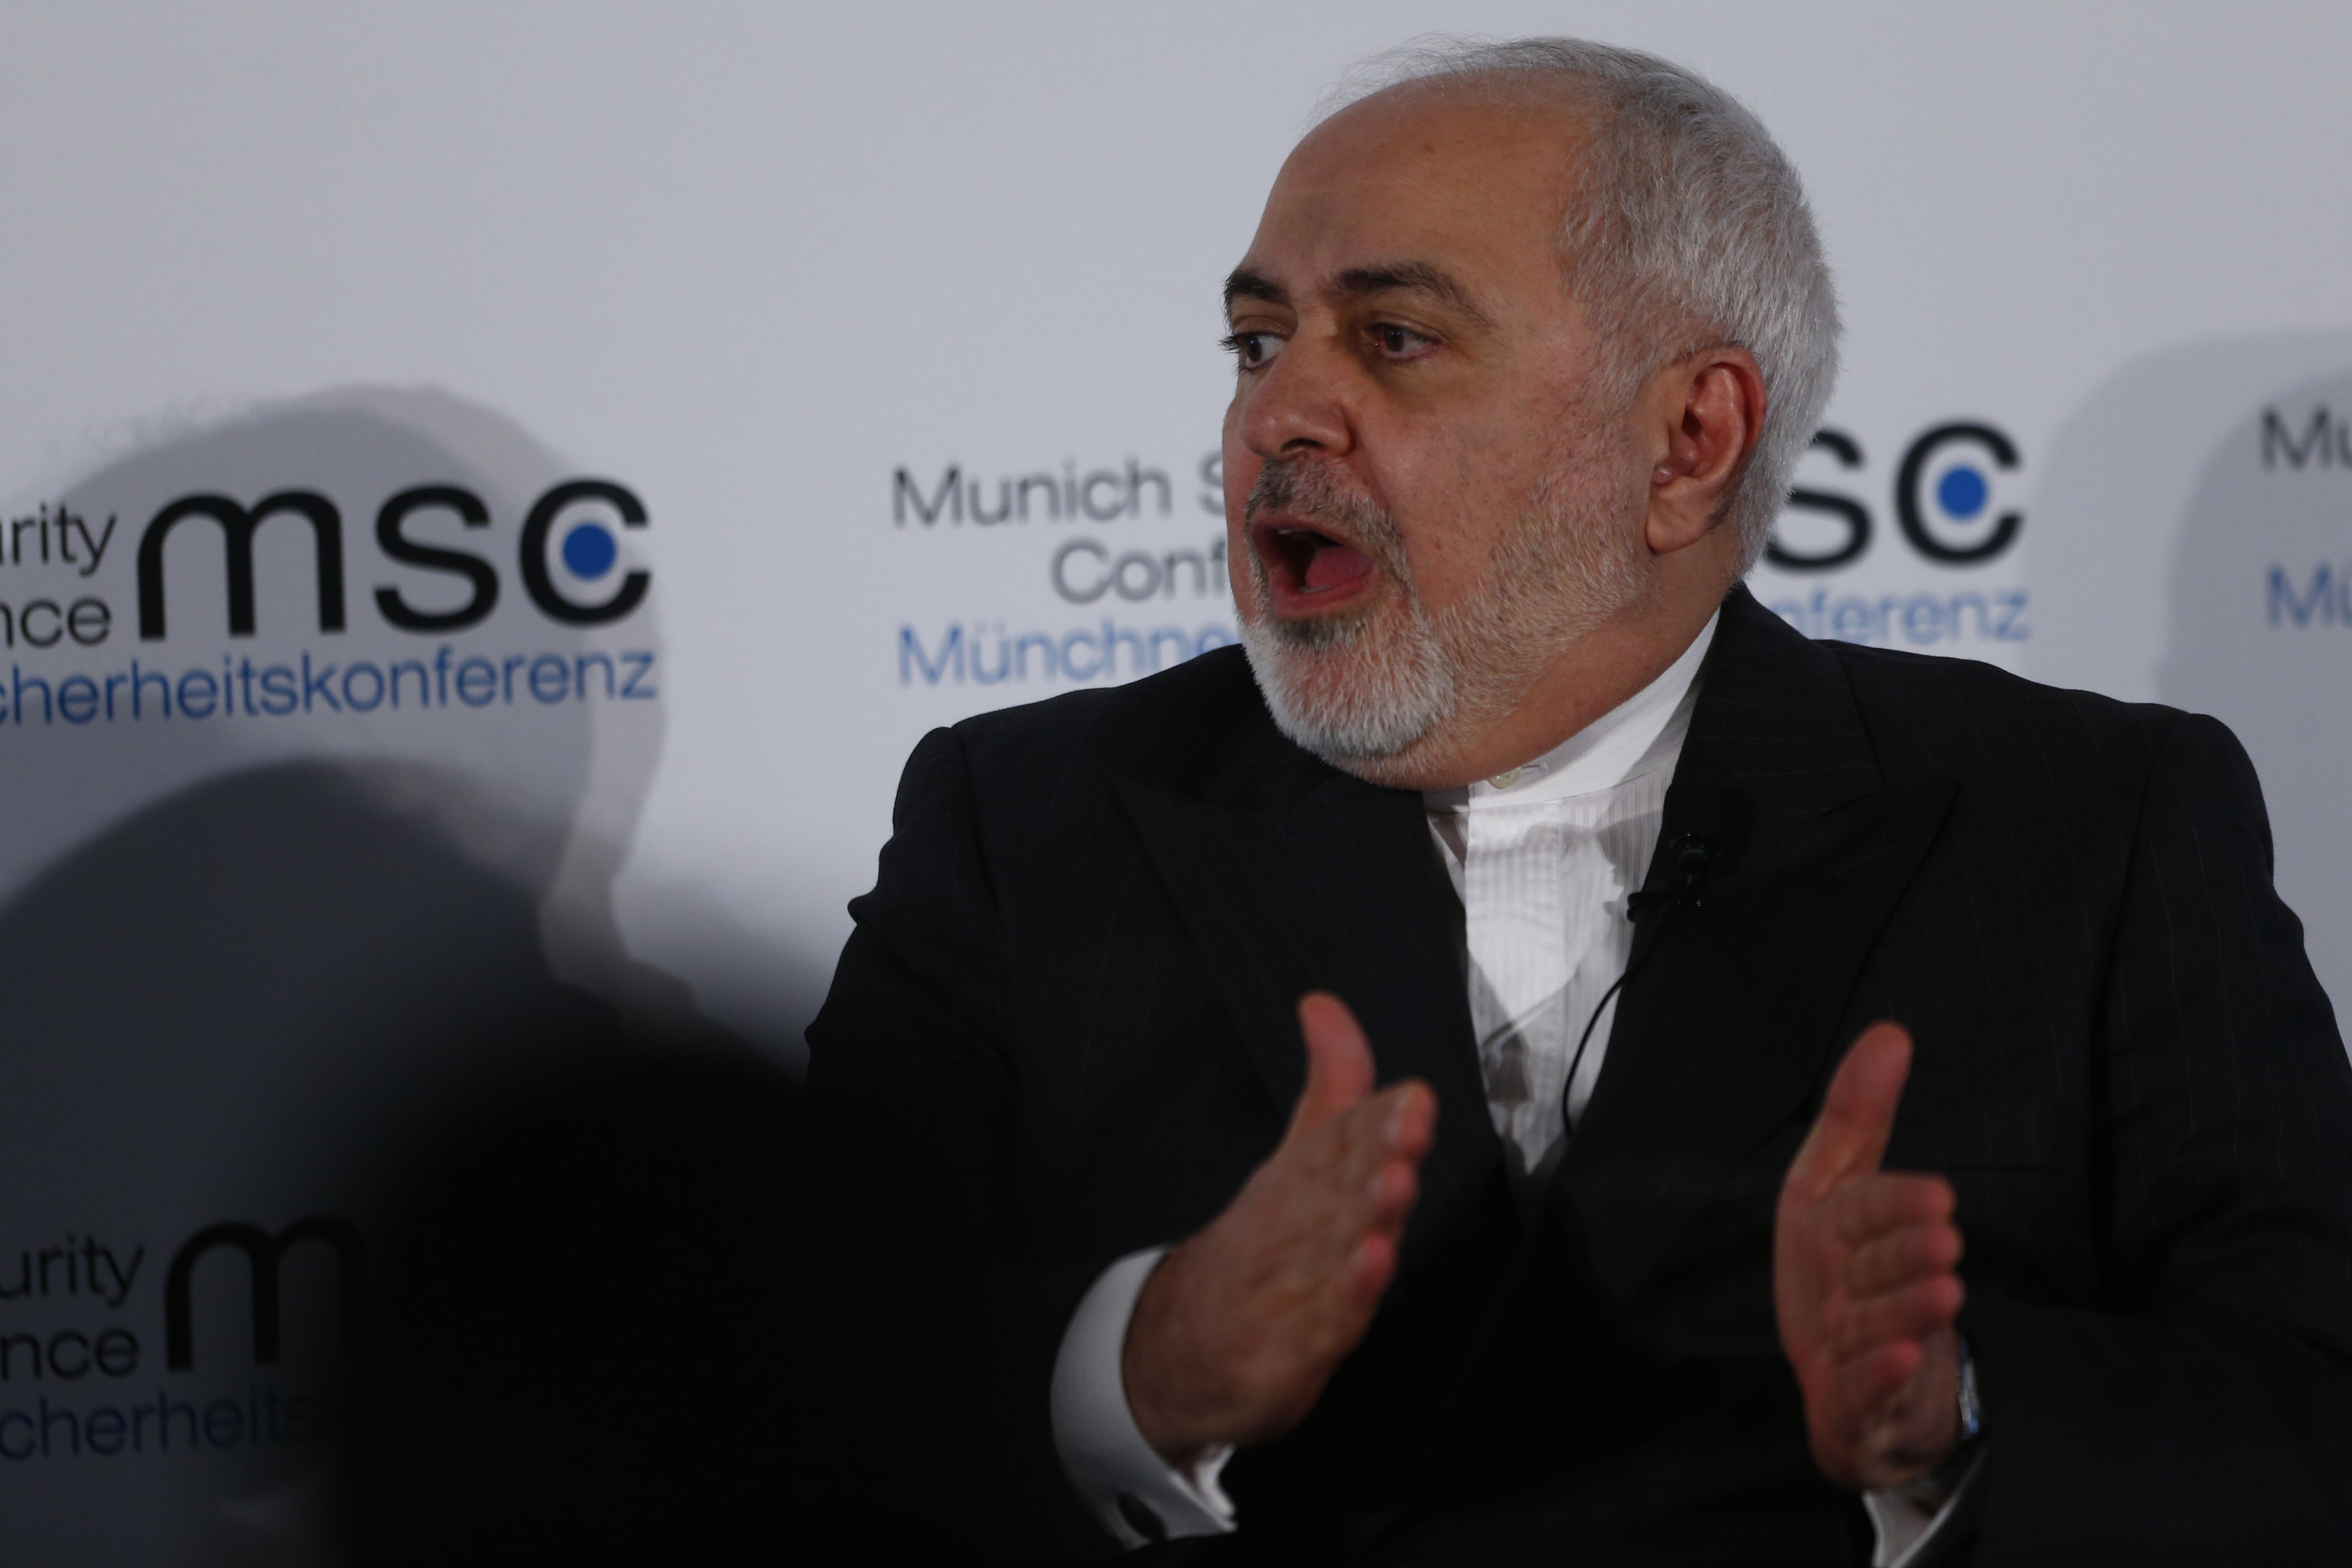 Mohammad Javad Zarif said&nbsp;“It’s not that you can come in, impose restrictions on others, benefit from the privileges of membership and then all of a sudden decide to leave and inflict $250 billion of damage on the Iranian people.”